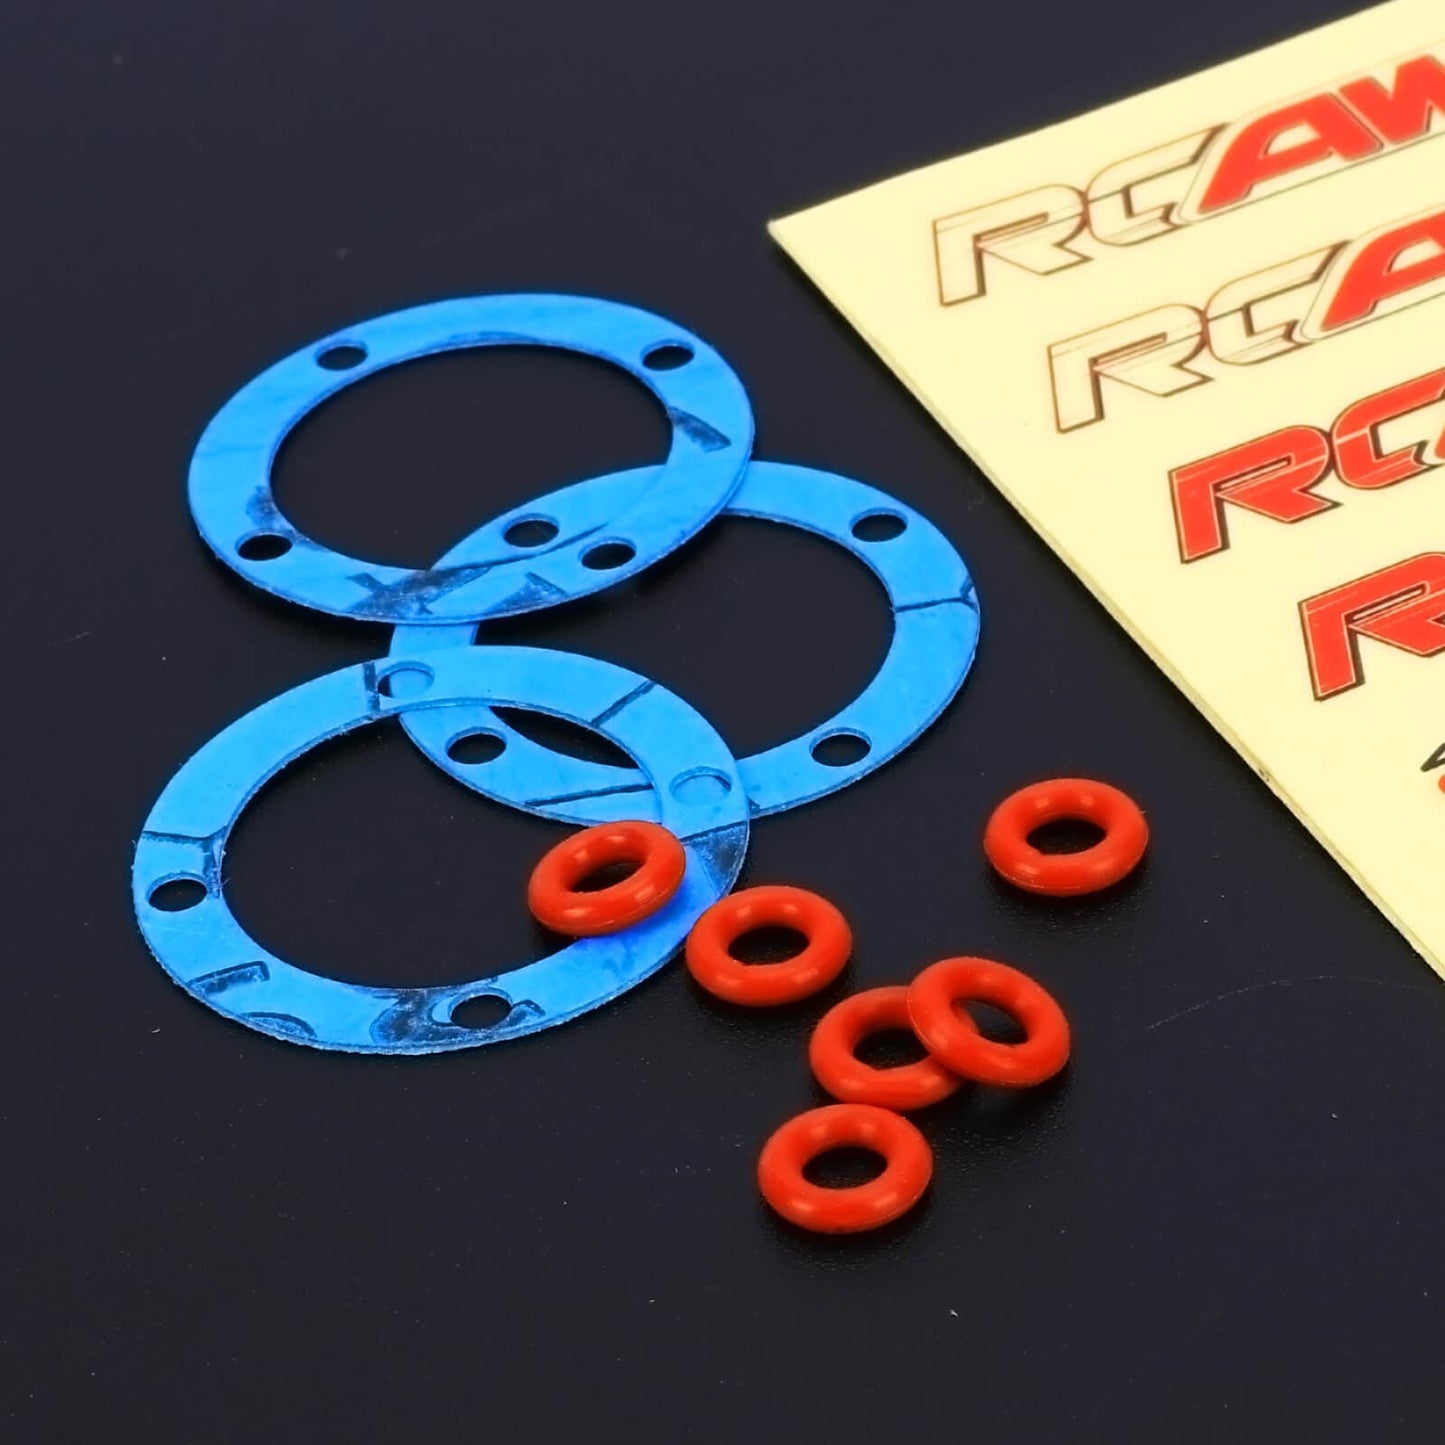 RCAWD Losi LMT Upgrades Non Asbestos Outdrive O - rings and Diff Gaskets - RCAWD